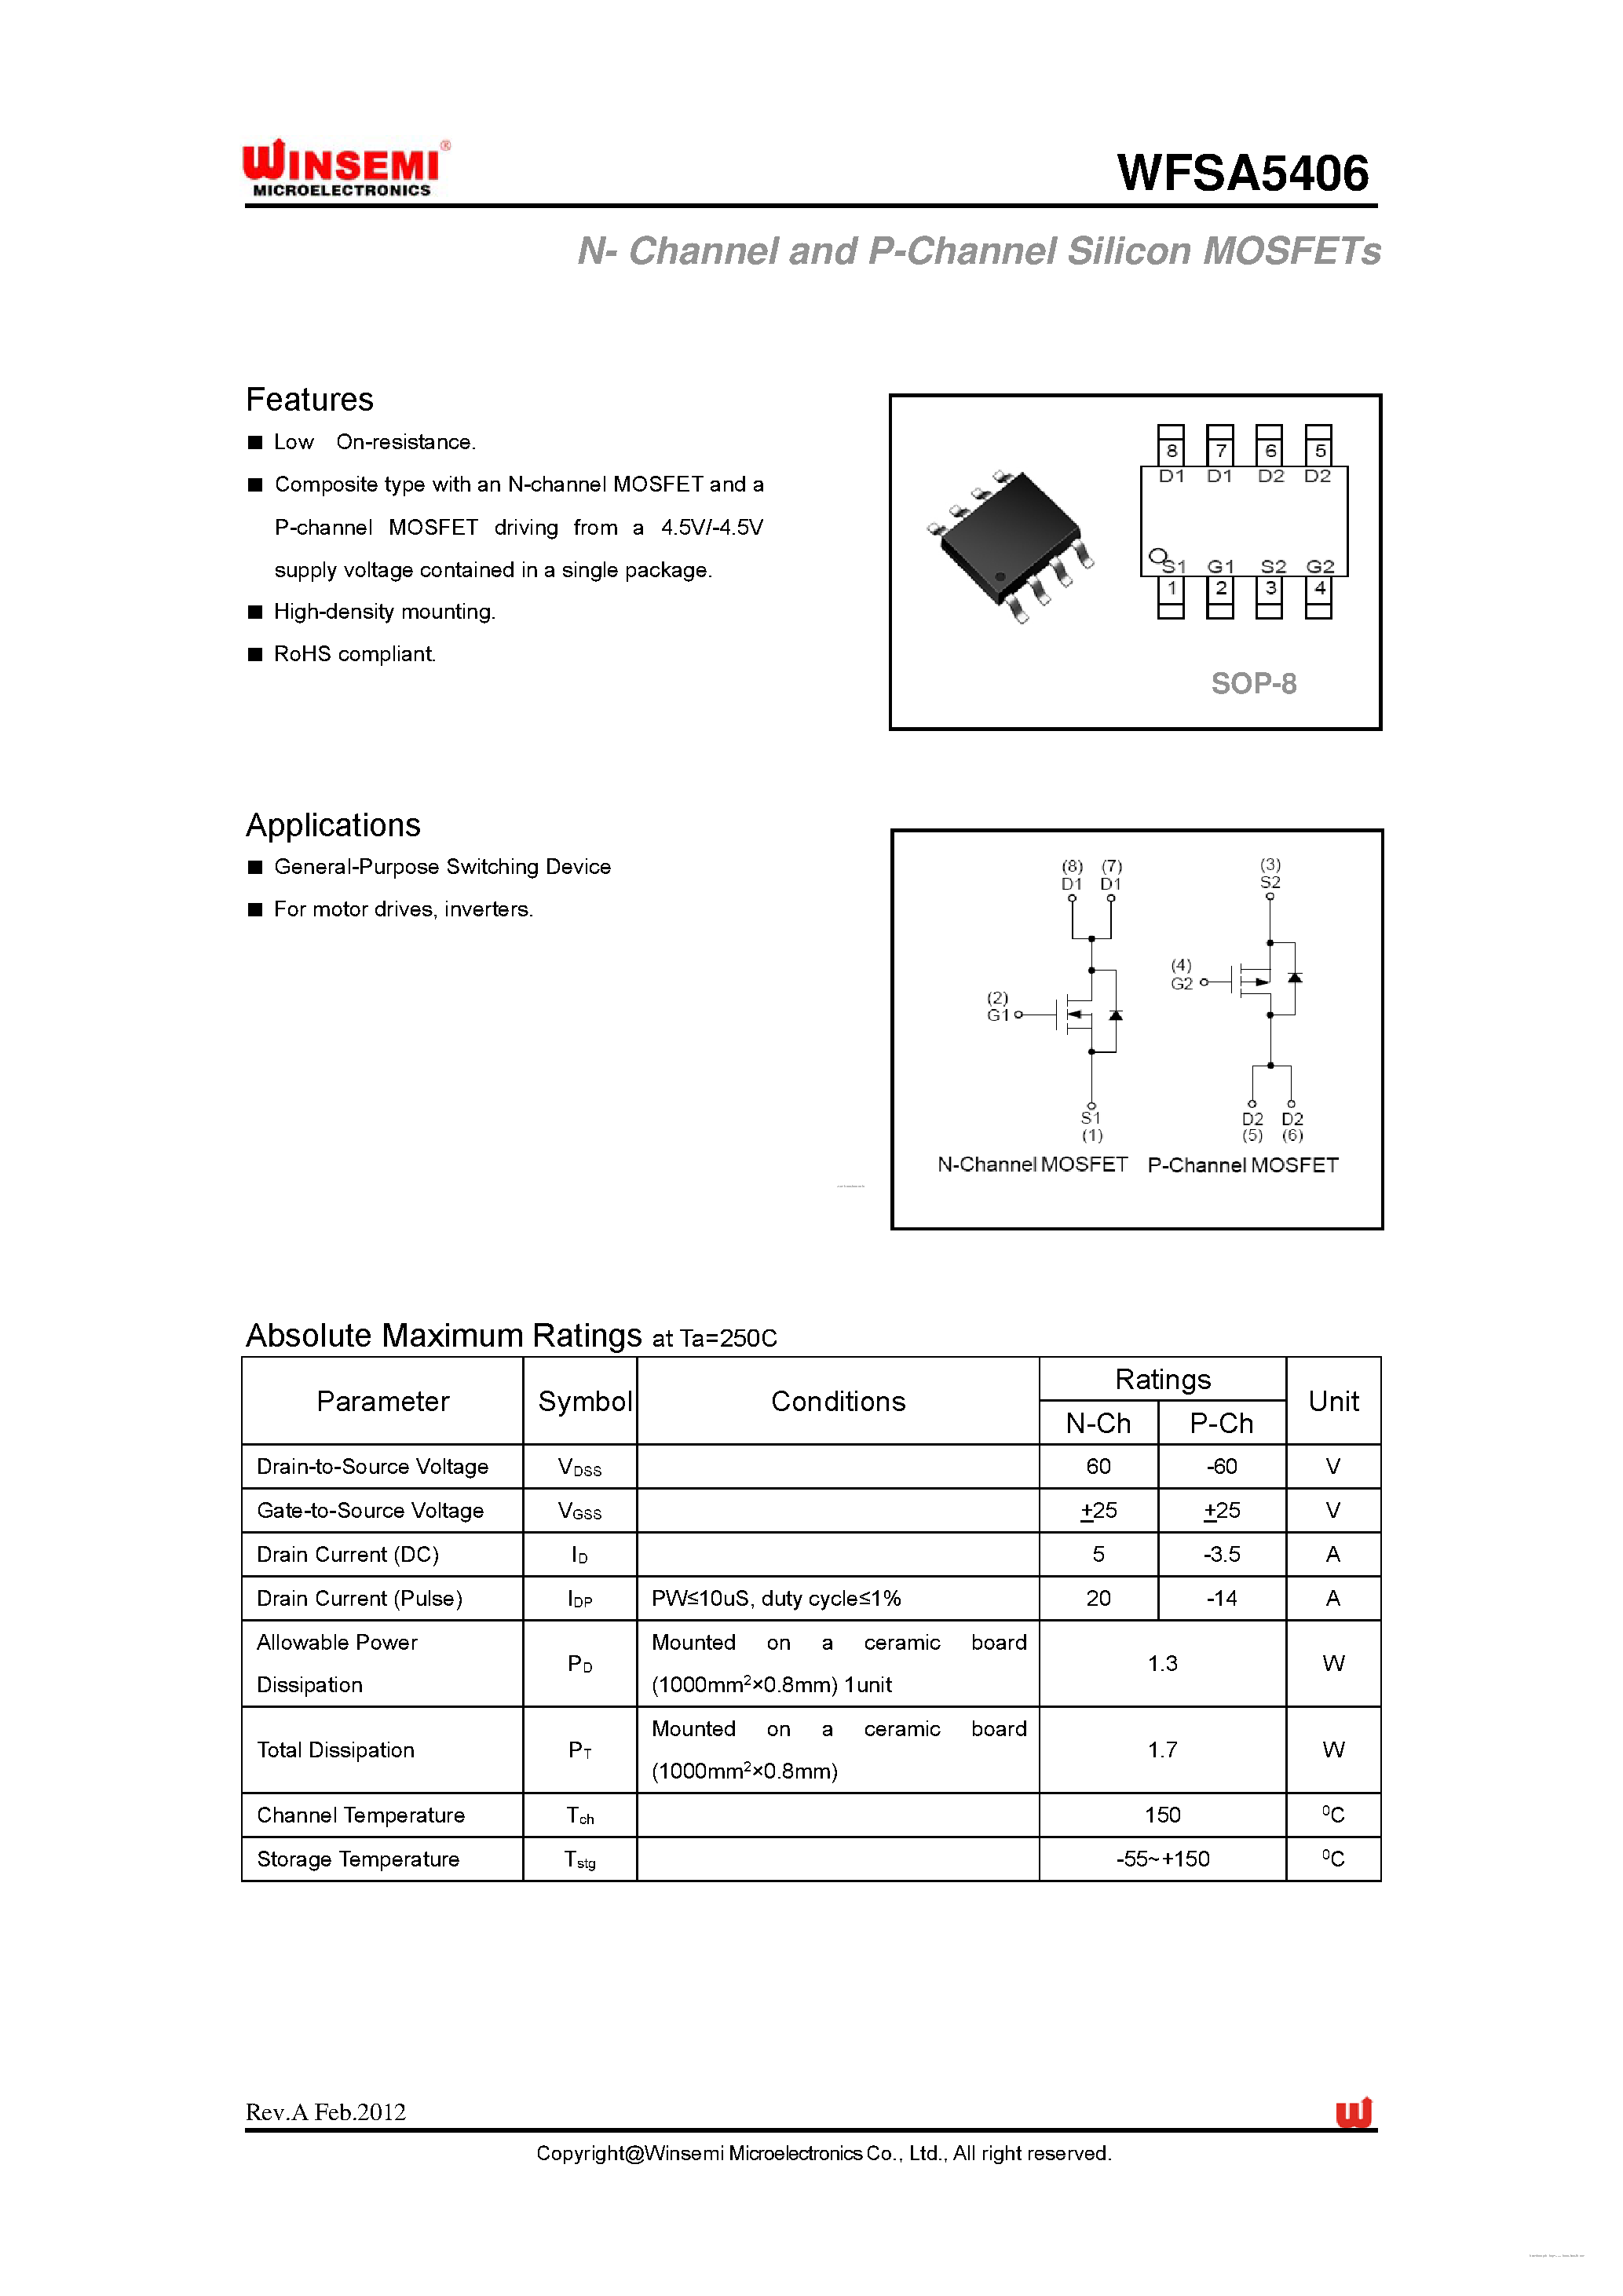 Даташит WFSA5406 - N- Channel and P-Channel Silicon MOSFETs страница 1